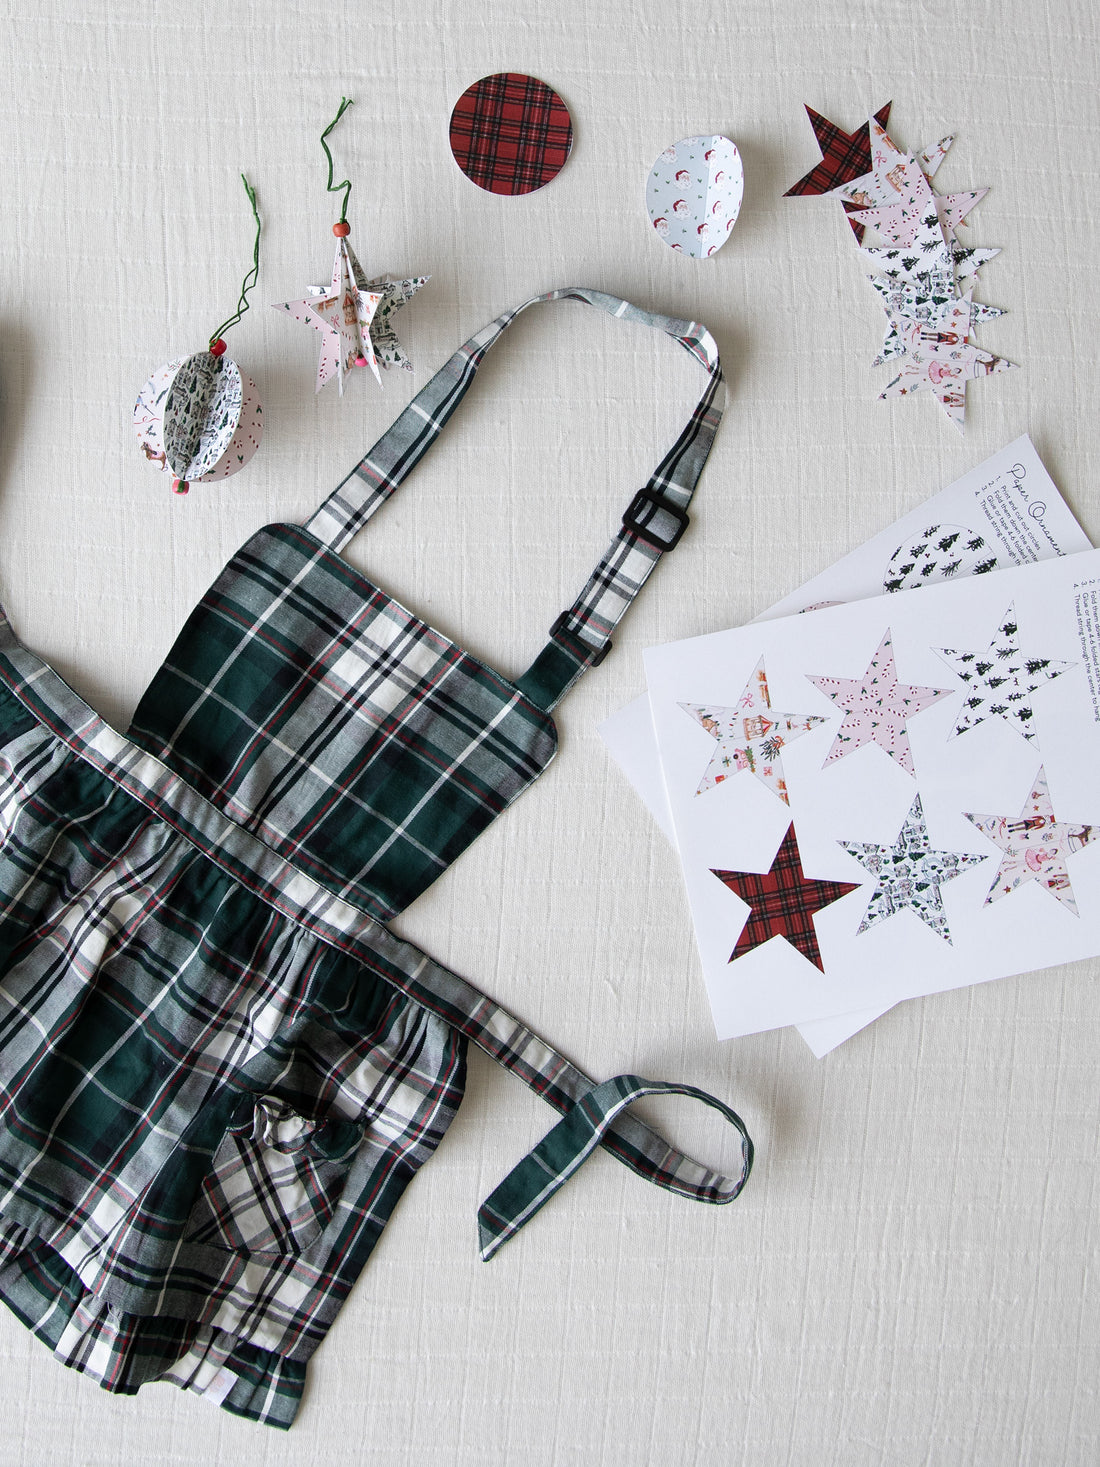 Fun Holiday Craft Activities - Printable Paper Ornaments